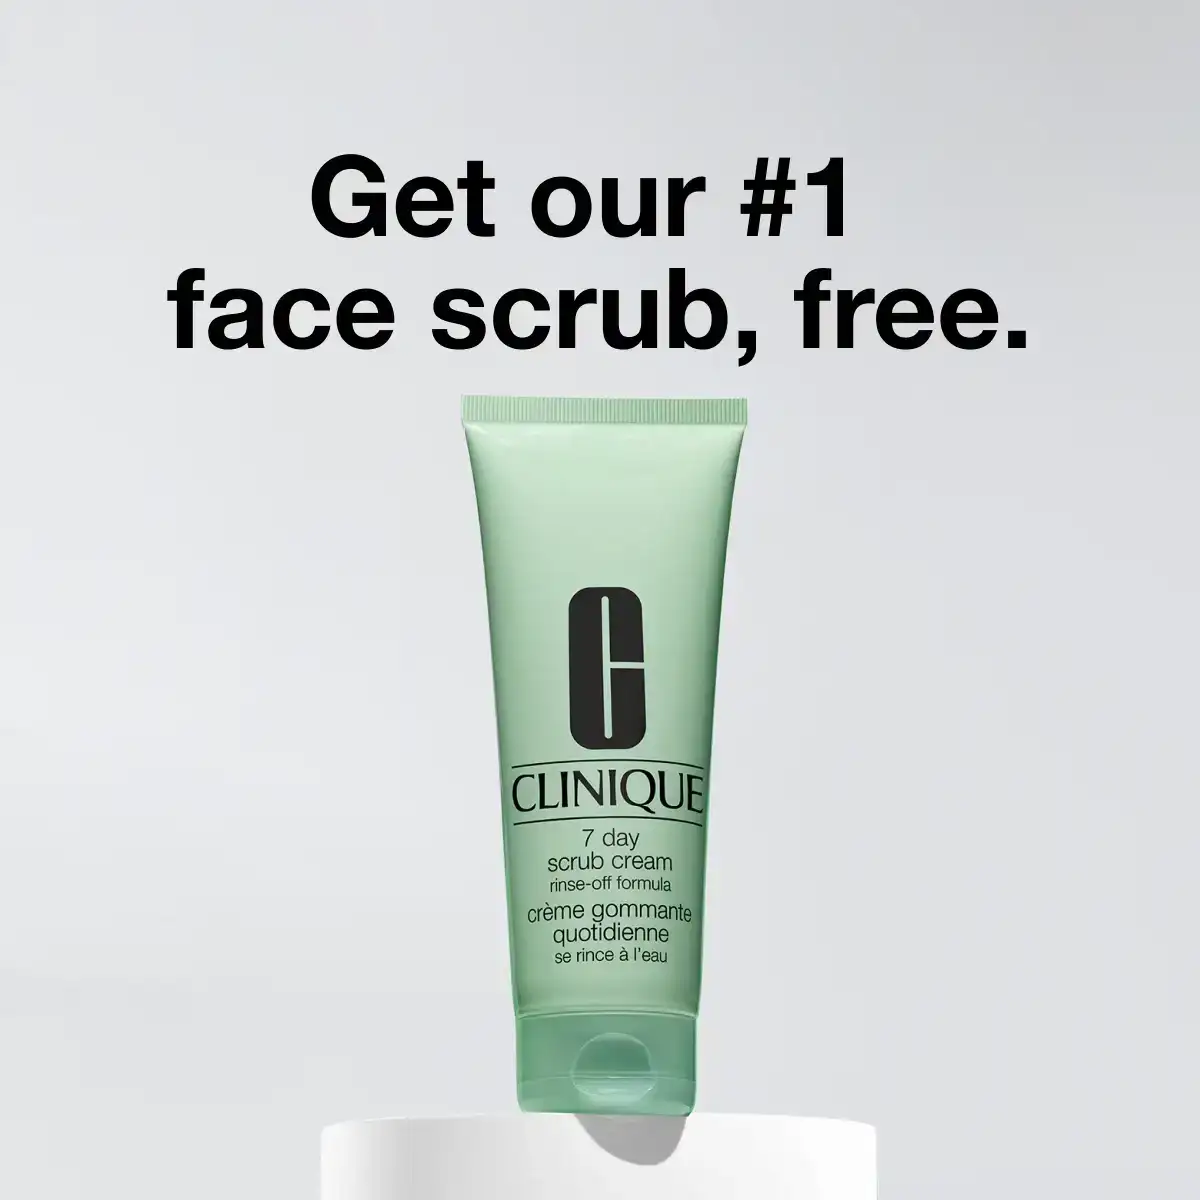 Get our #1 face scrub, free.